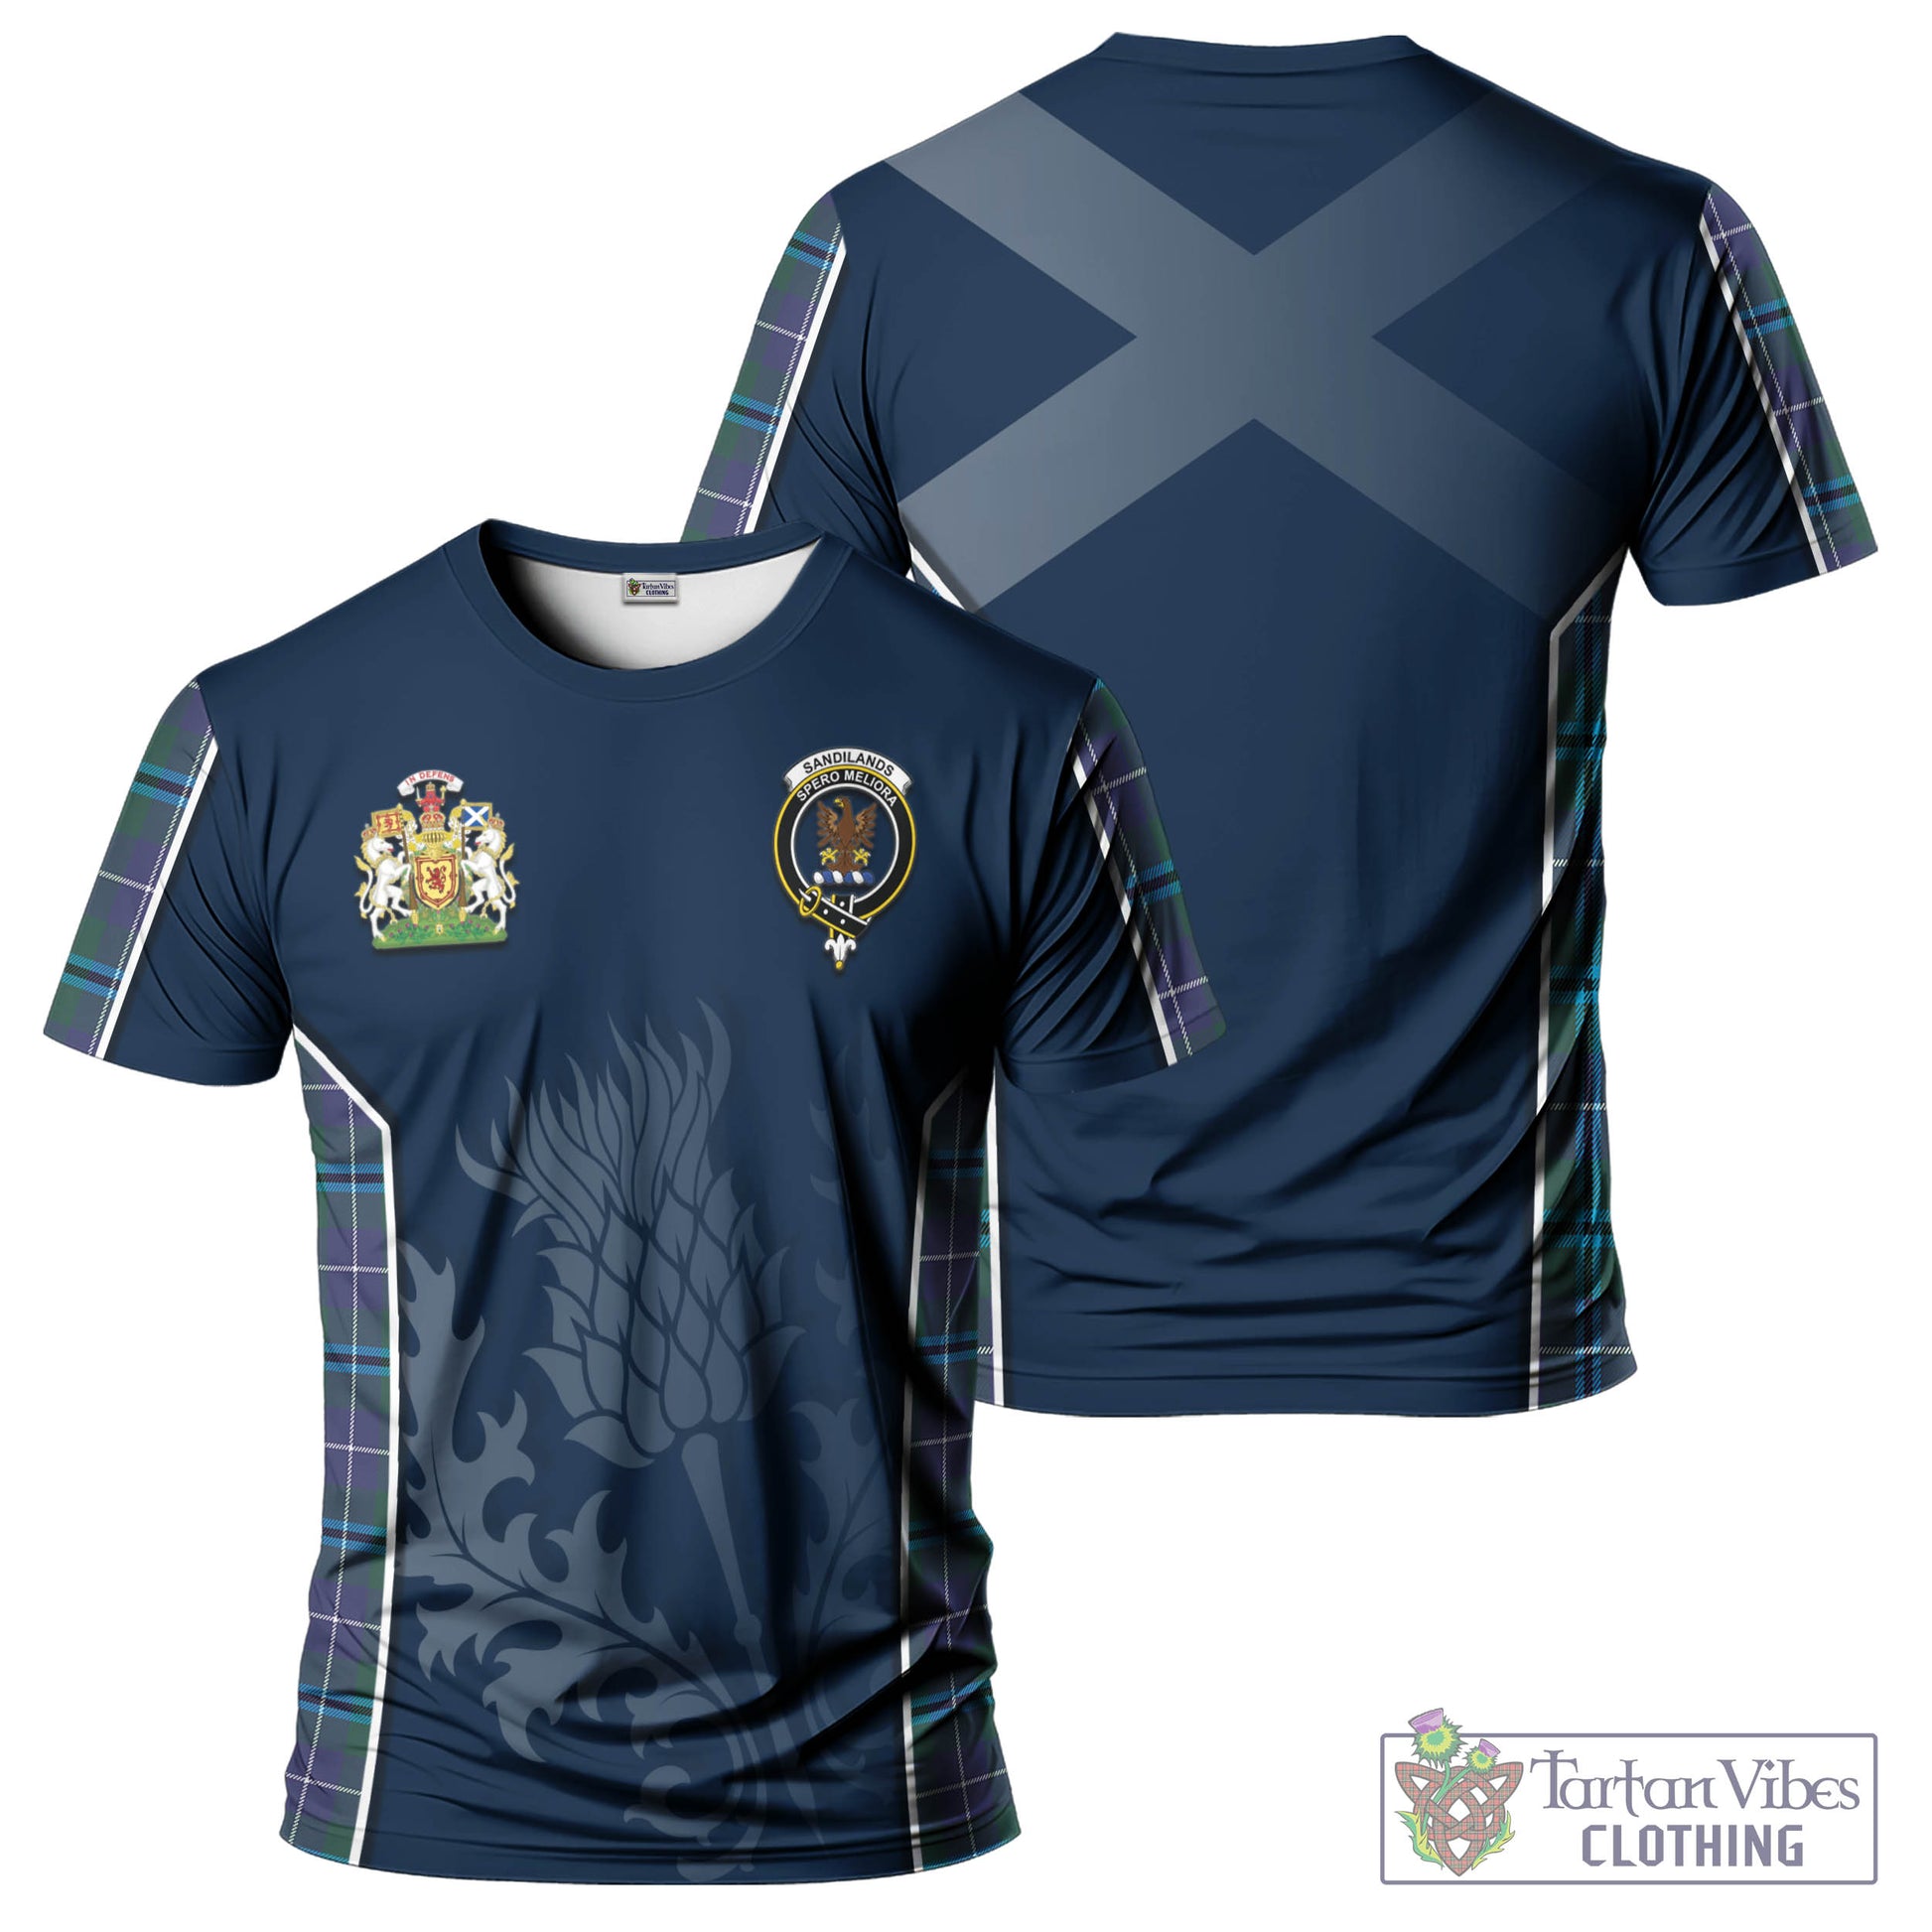 Tartan Vibes Clothing Sandilands Tartan T-Shirt with Family Crest and Scottish Thistle Vibes Sport Style